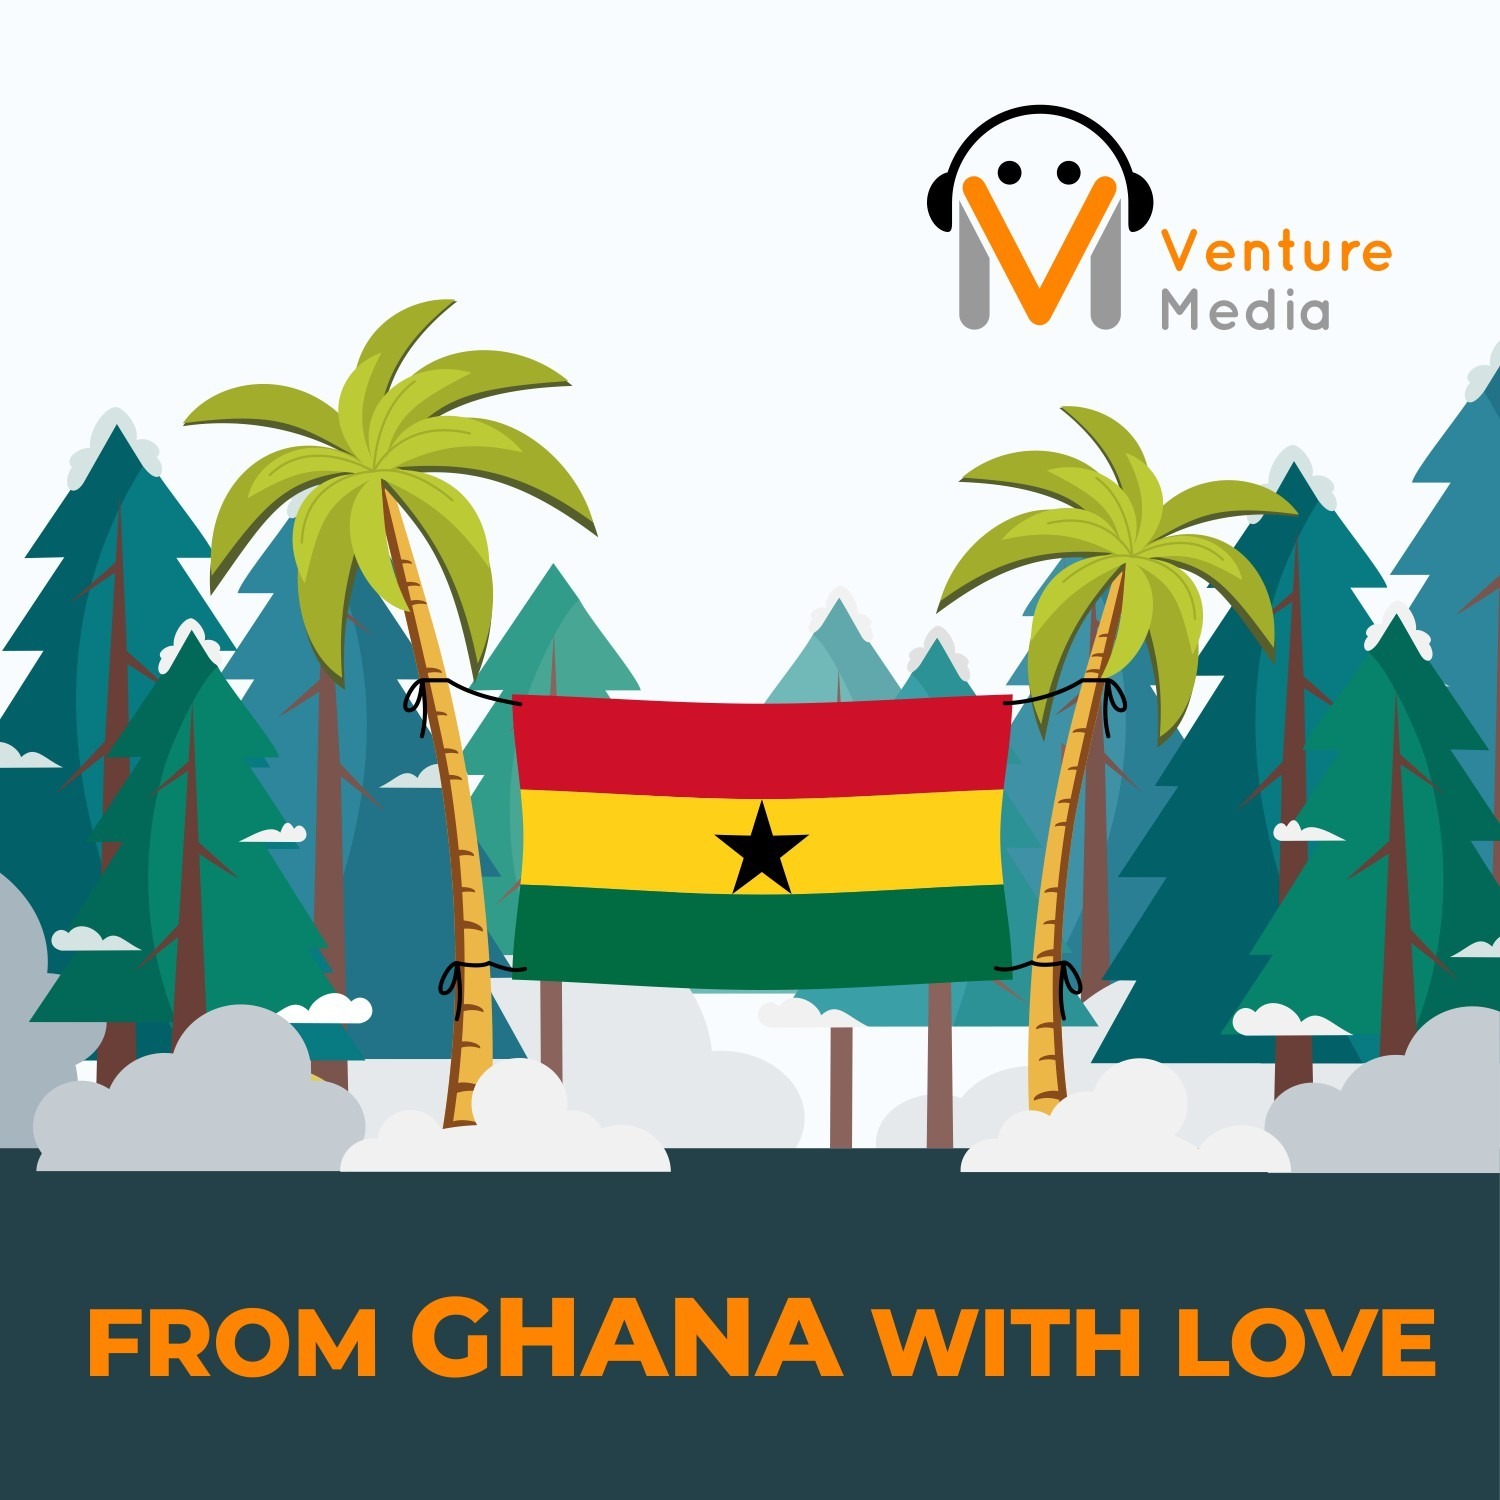 From Ghana with Love:Venture Media